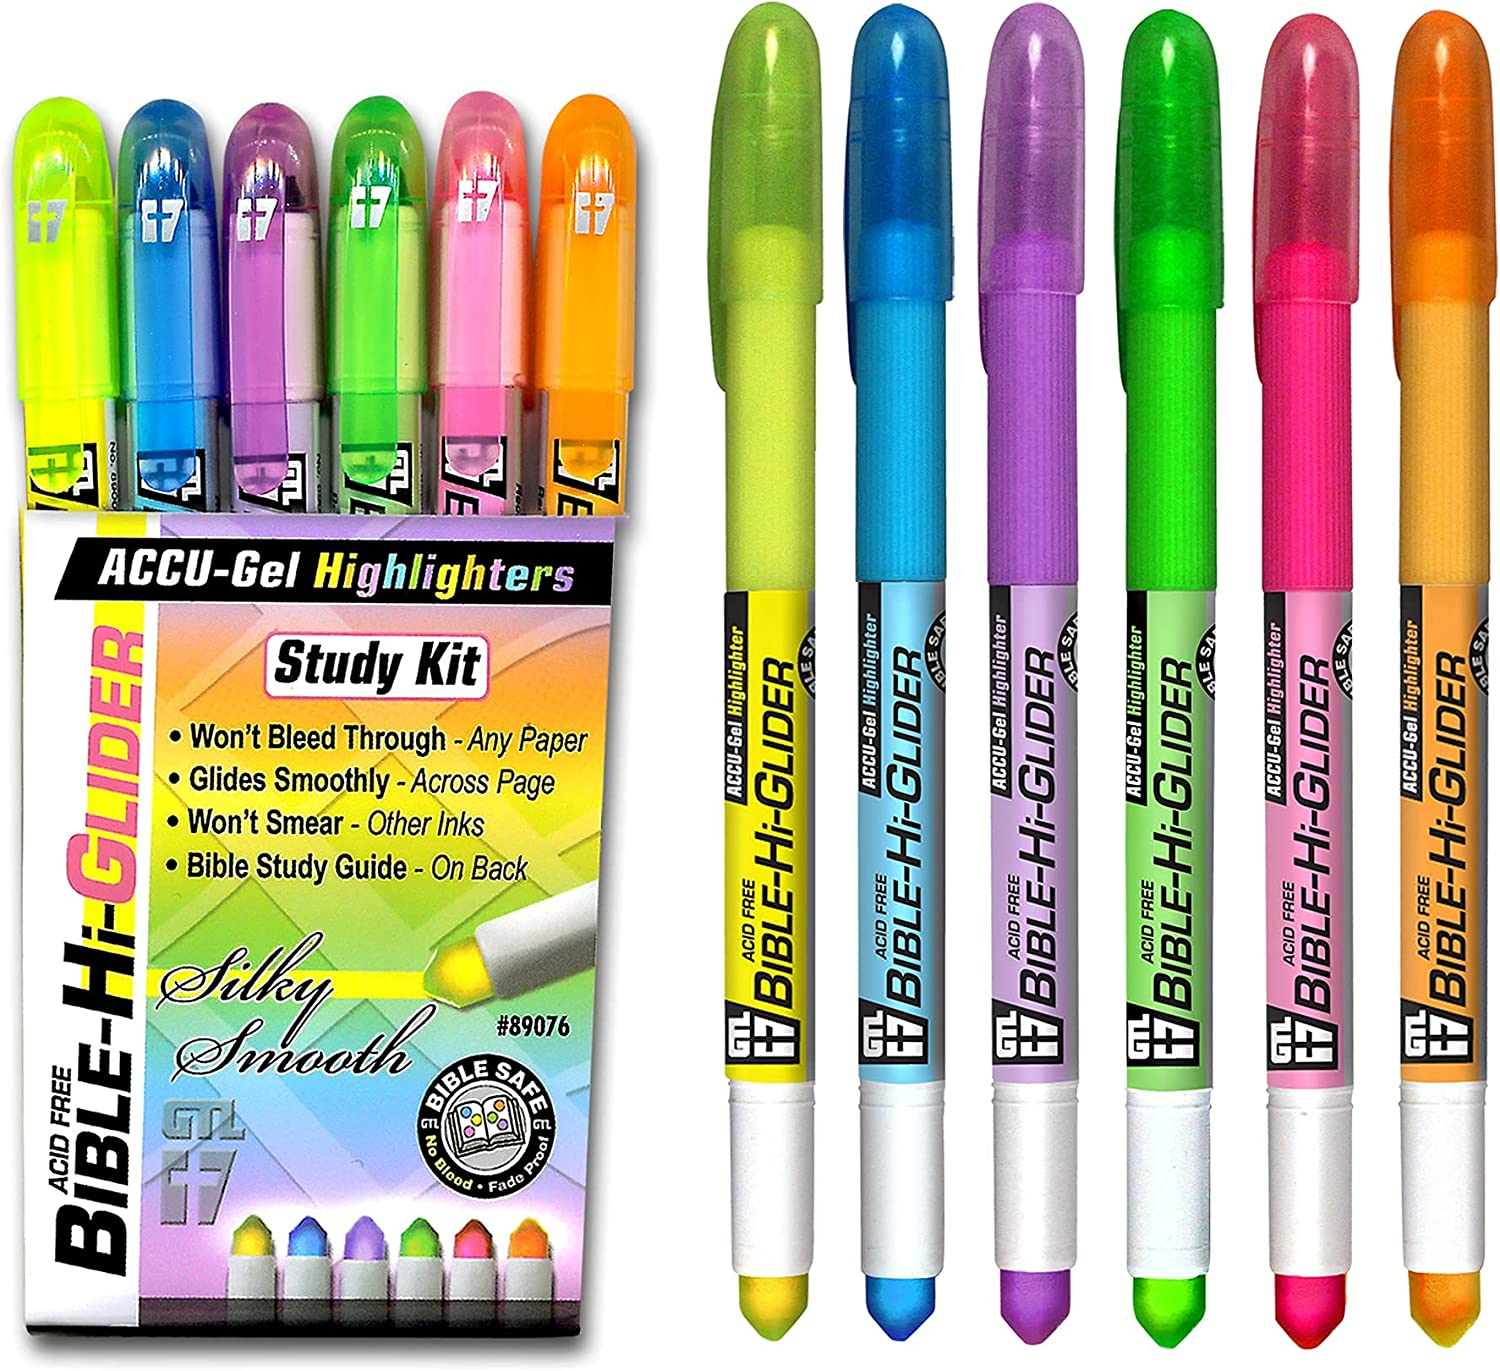 6 Pack Bible Gel Highlighters Assorted Colors, 6 Different Bright Highlight Colors Yellow, Orange, Pink, Purple, Green, Blue - Multicolor No Bleed